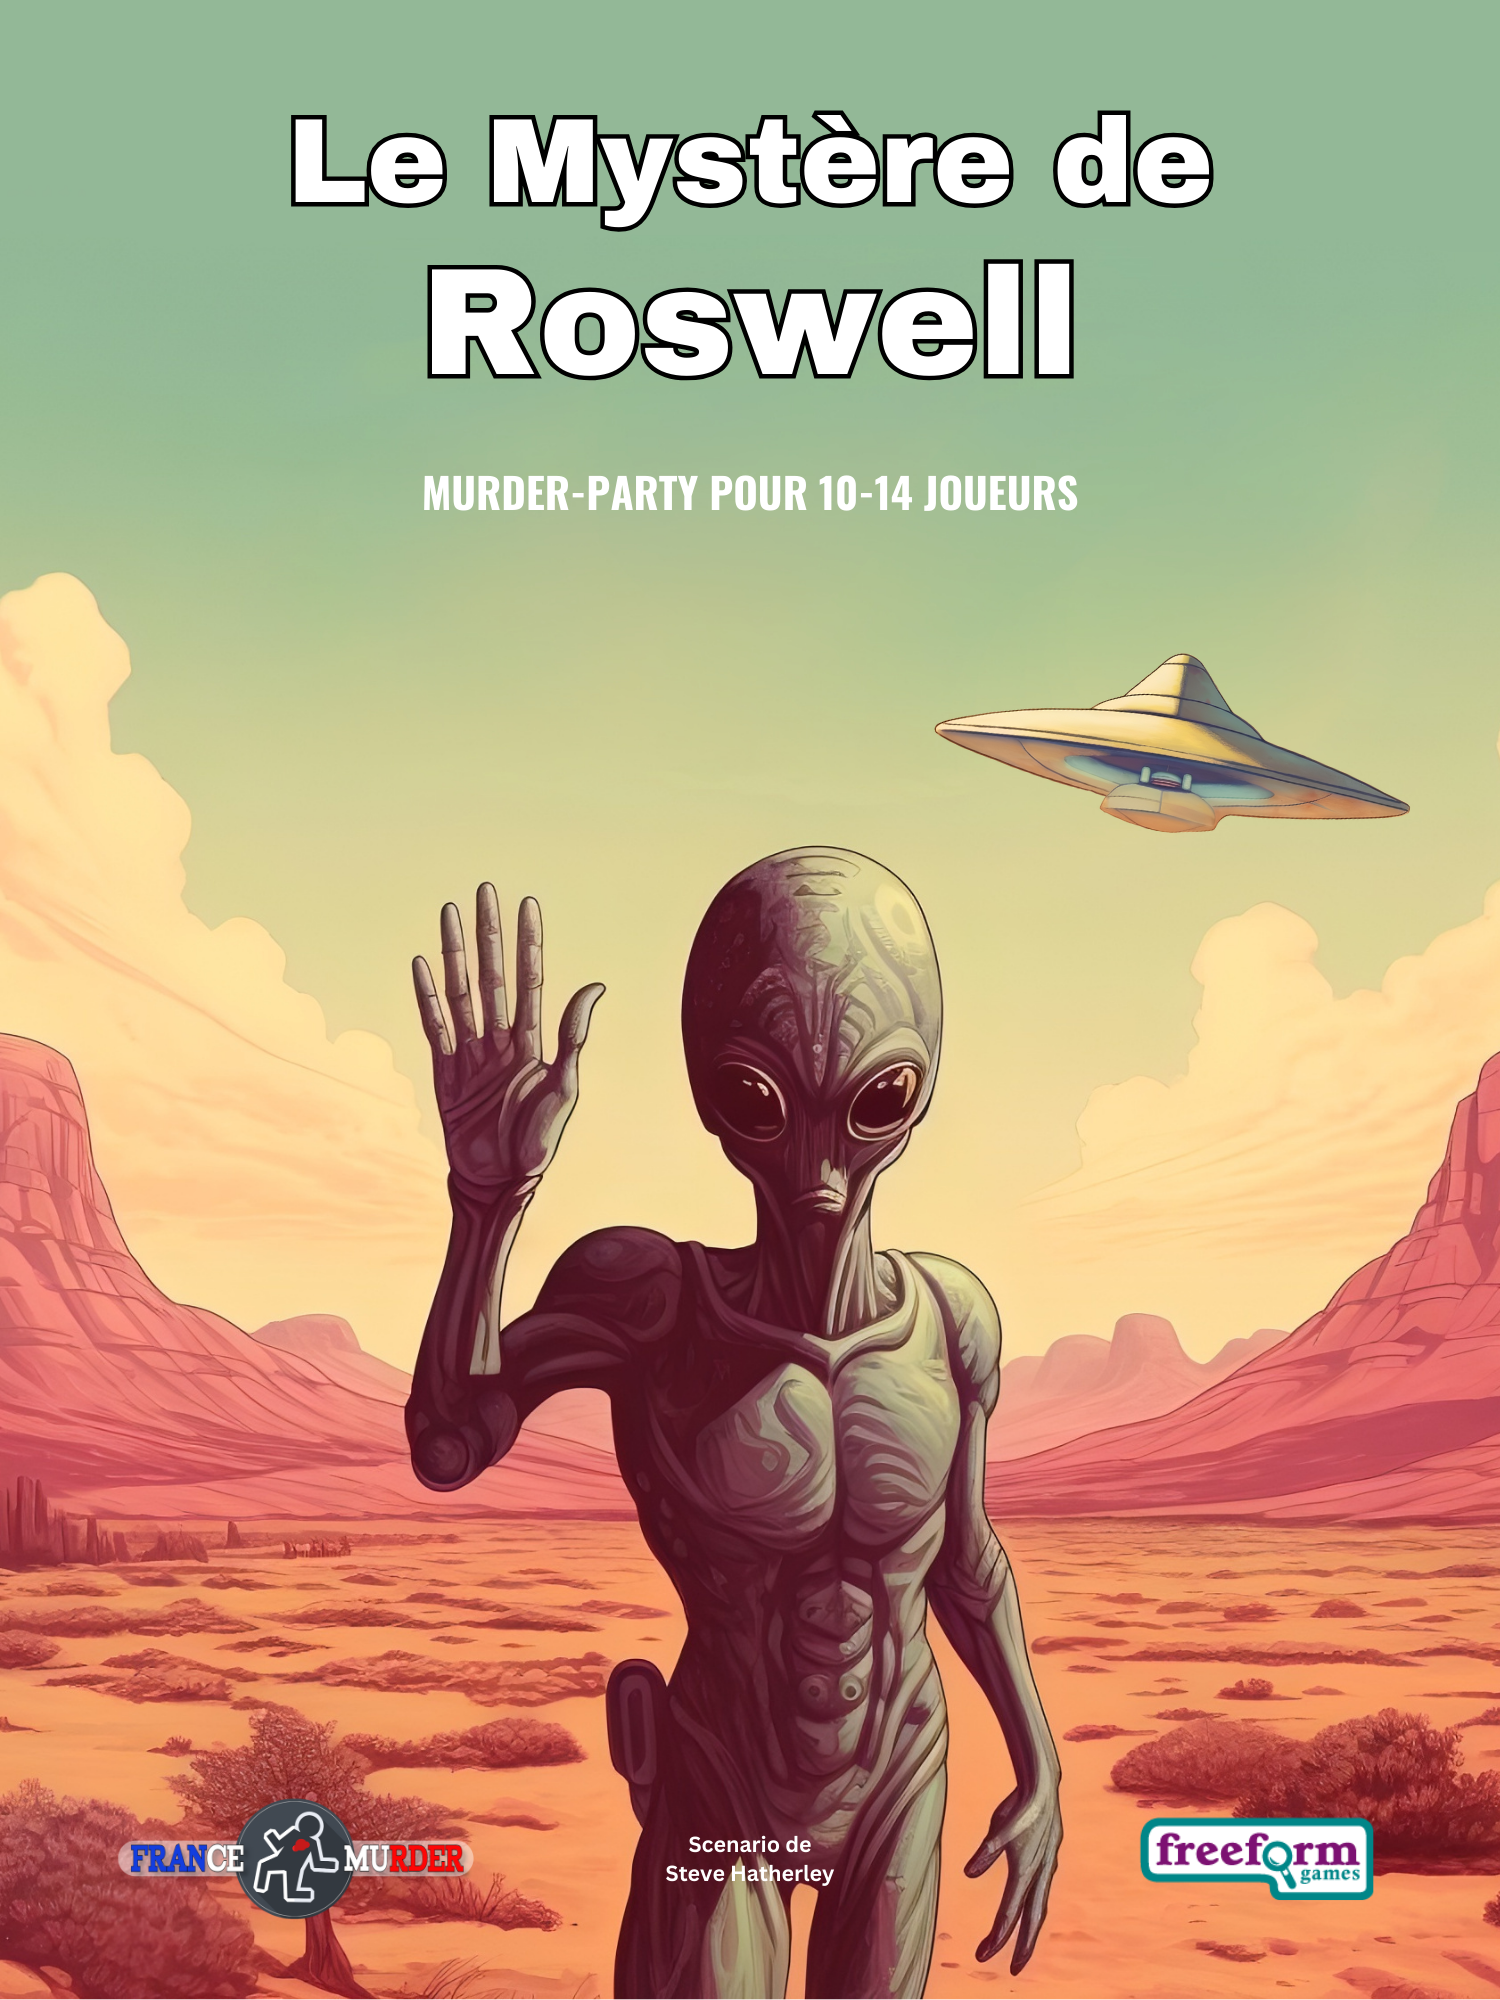 Le Mystere de Roswell